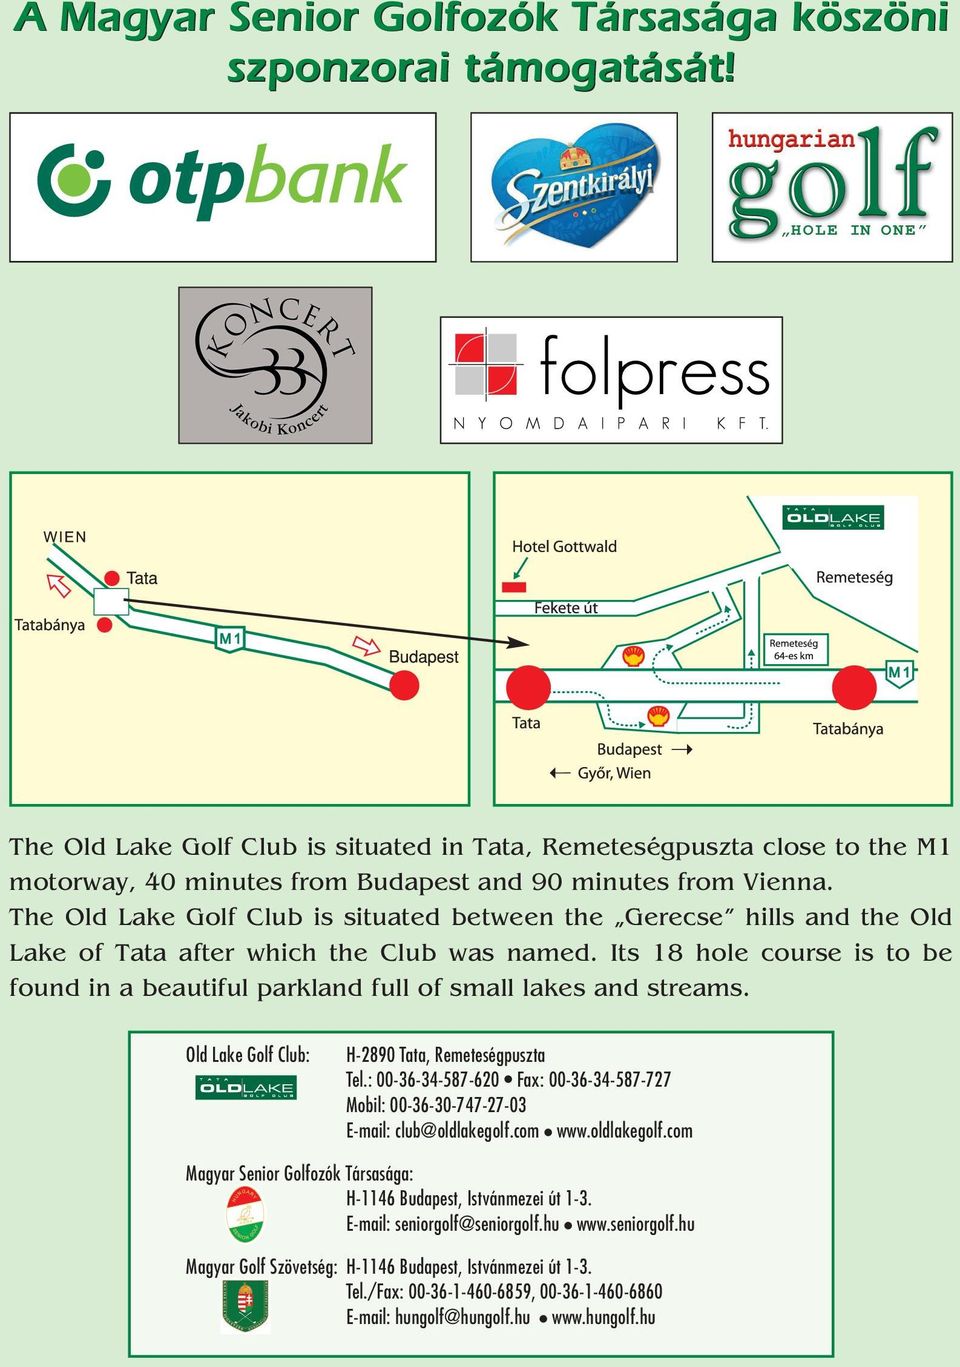 The Old Lake Golf Club is situated between the Gerecse hills and the Old Lake of Tata after which the Club was named.